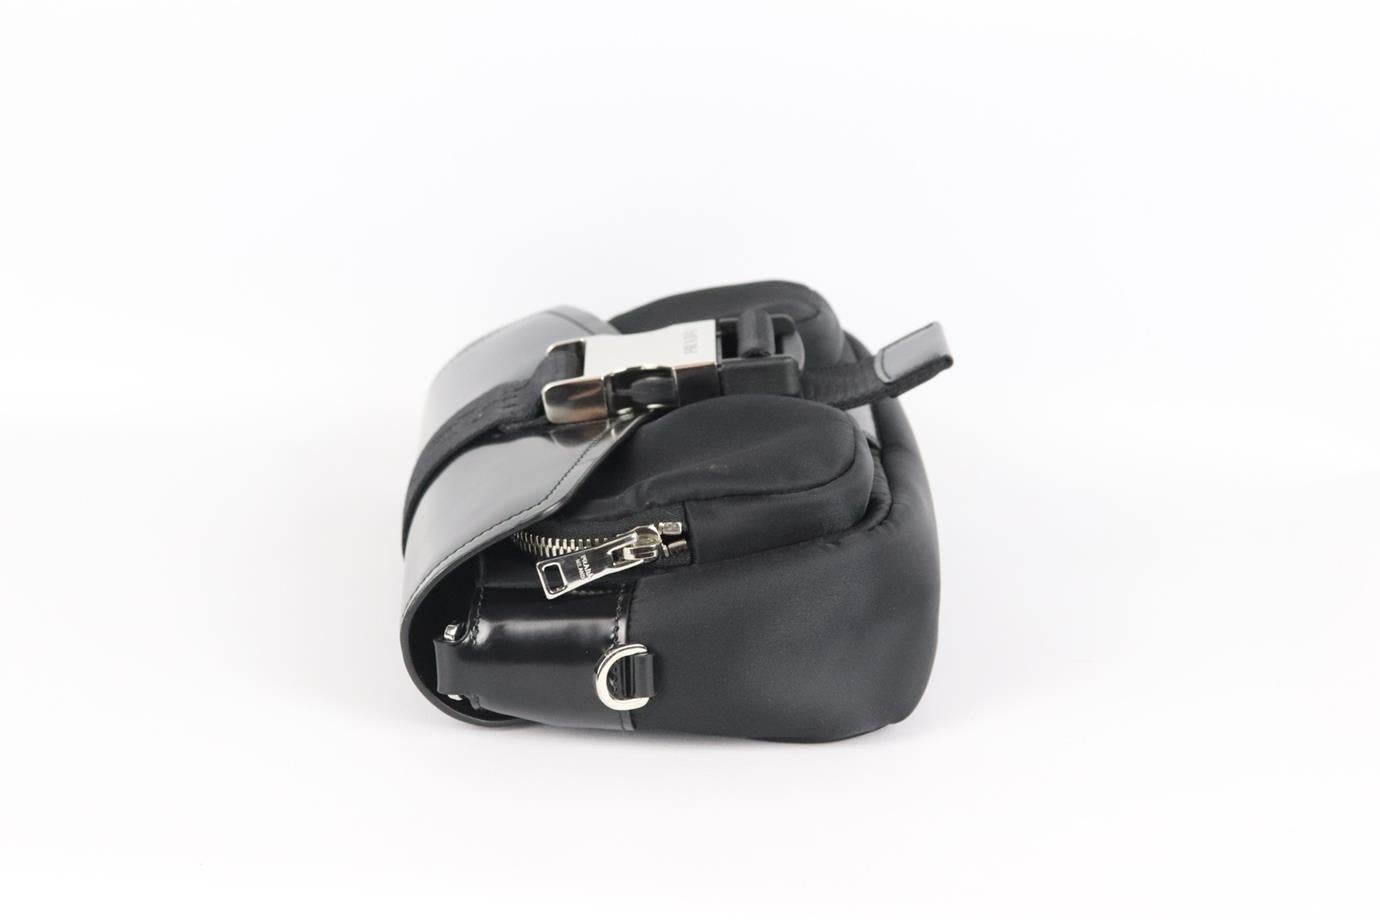 Prada Pocket Leather And Nylon Shoulder Bag In Excellent Condition For Sale In London, GB